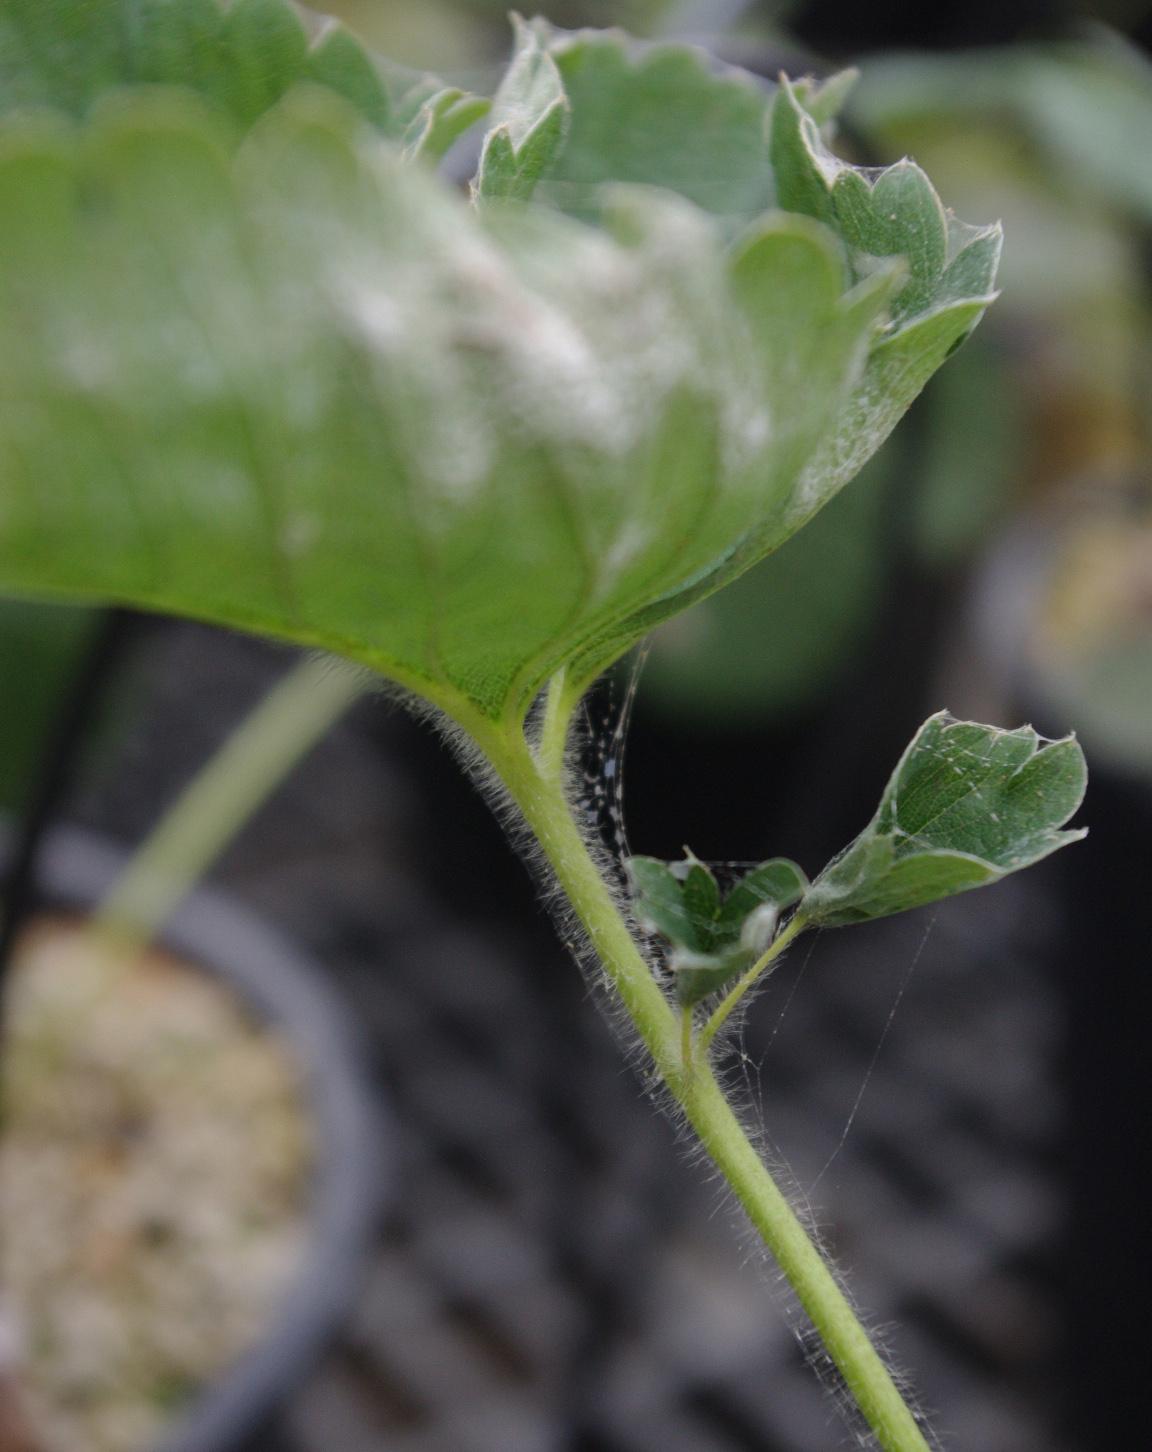 Webbing caused by two-spotted spider mites (Strang, UKY)